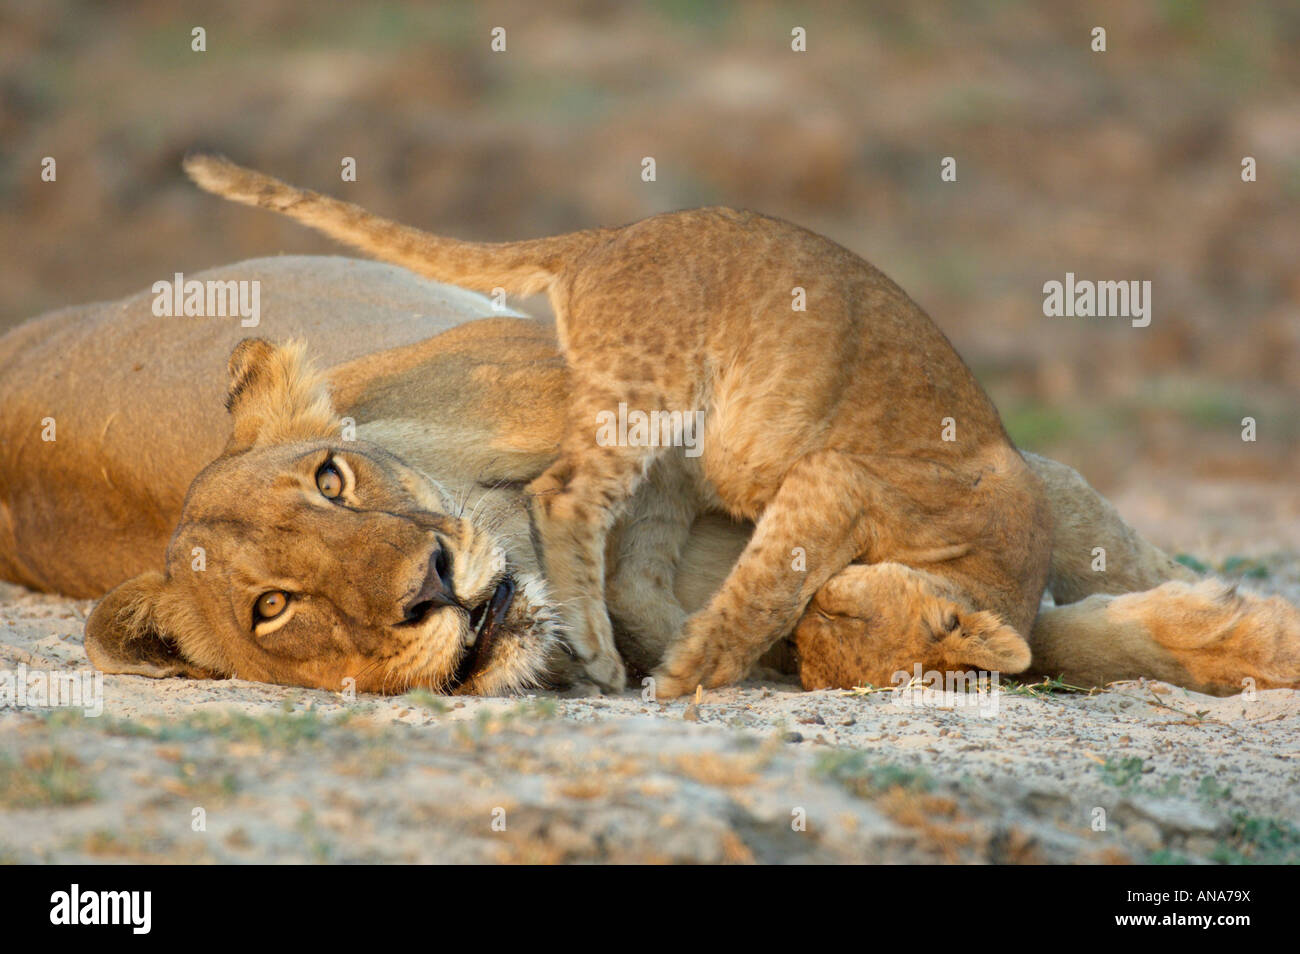 Lioness and her cub playing with the cub falling head over heels Stock Photo